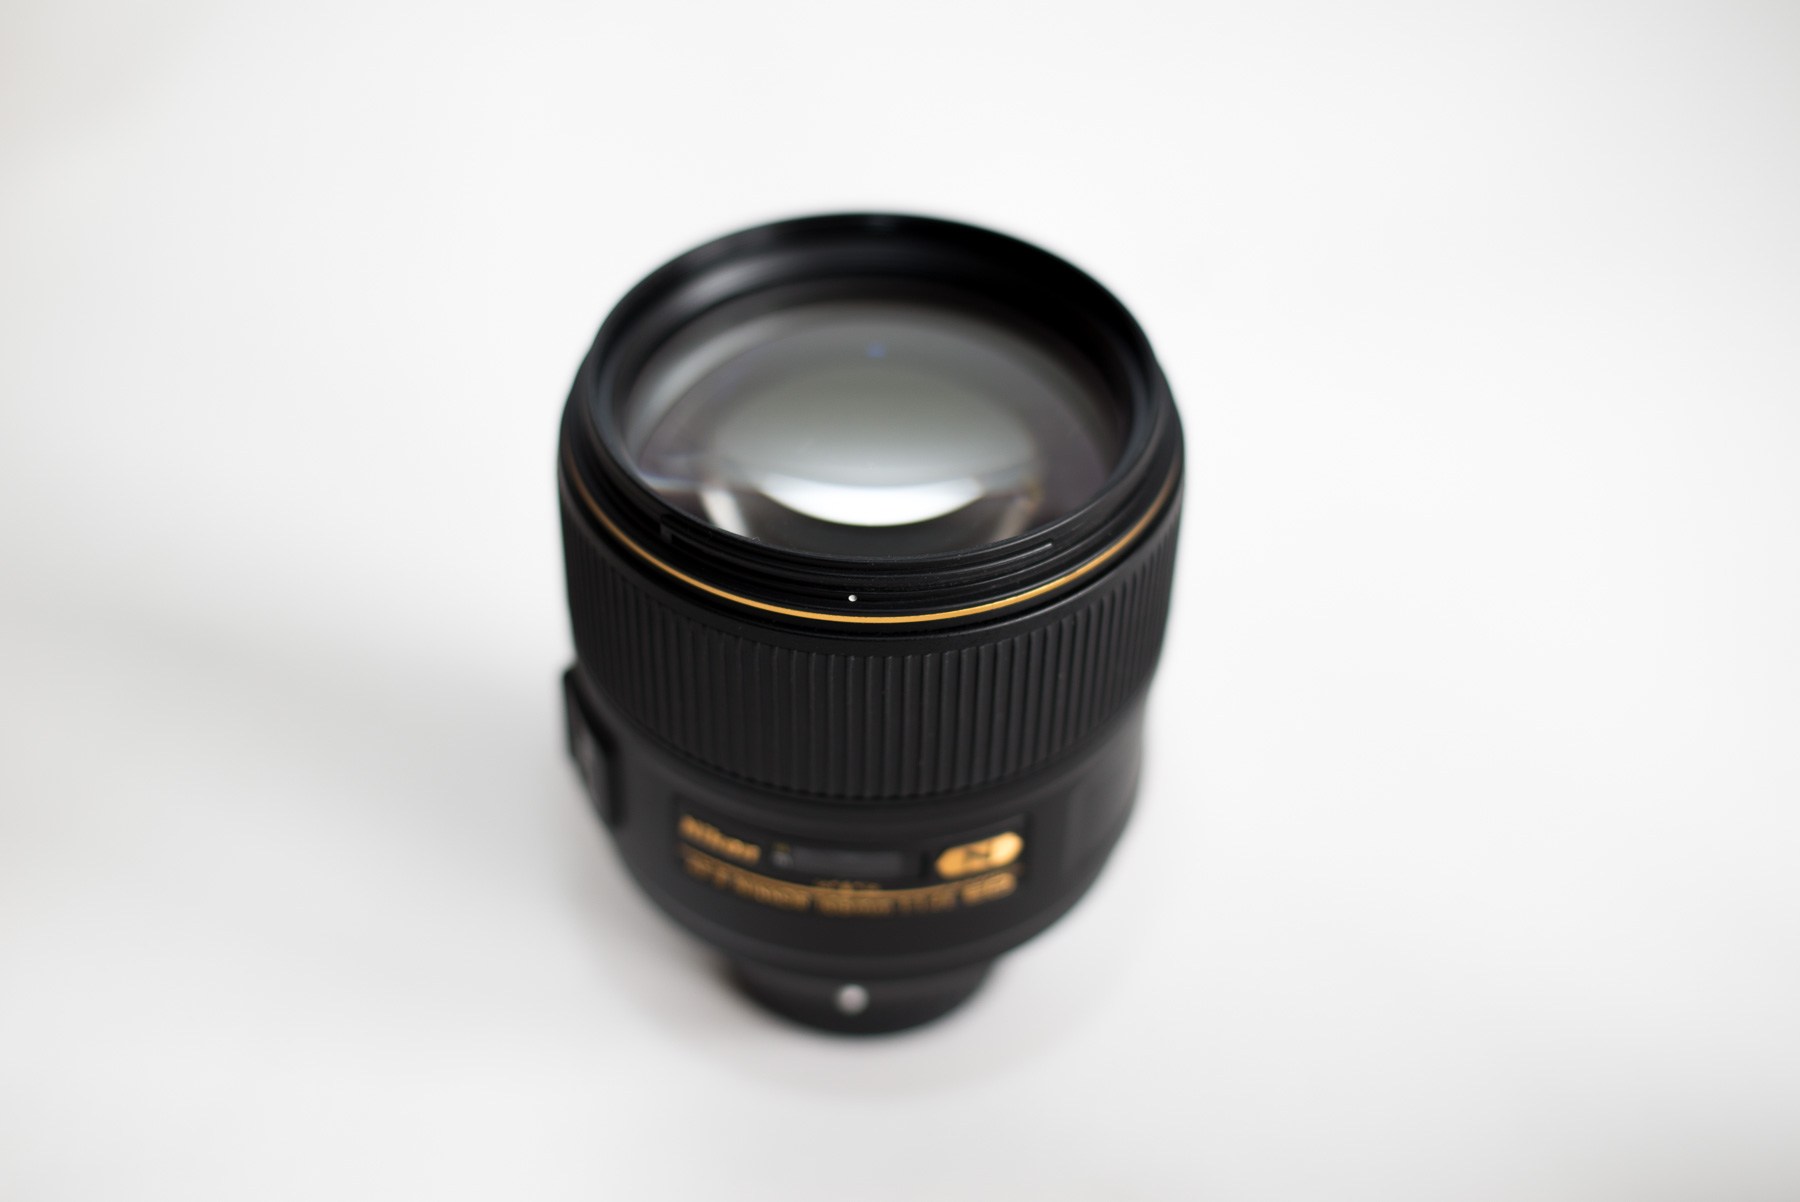 Nikon AF-S Nikkor 105mm f/1.4E ED review and comparison with the 